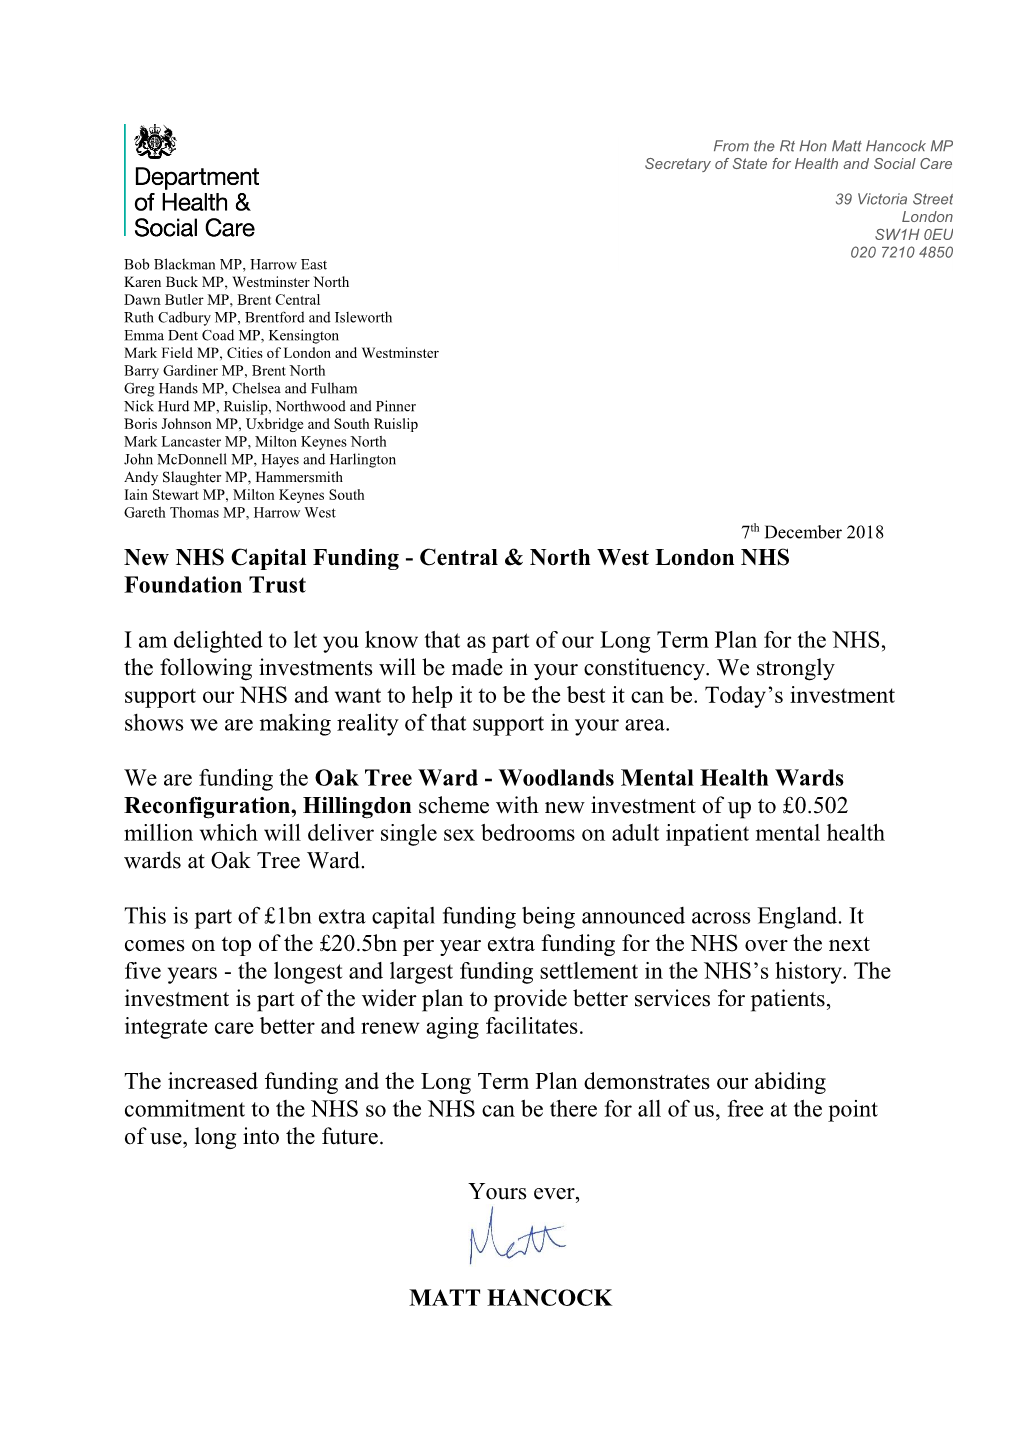 New NHS Capital Funding - Central & North West London NHS Foundation Trust